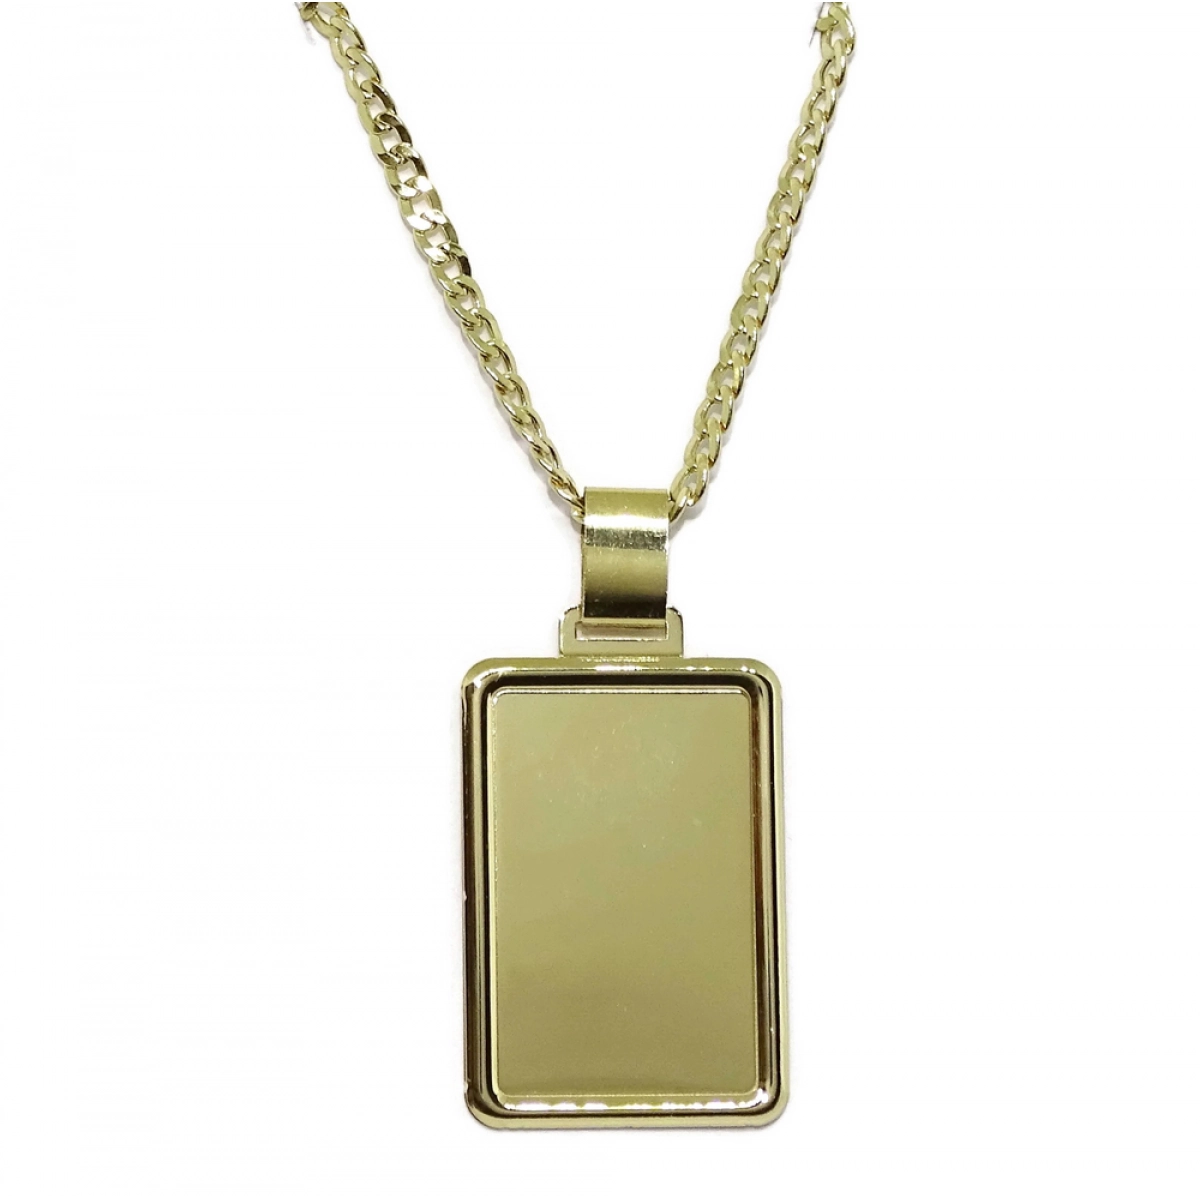 PLATE OF YELLOW GOLD OF 18K SMOOTH 2.60 BY 1.80 CM WITH CHAIN CURB 60CM NEVER SAY NEVER